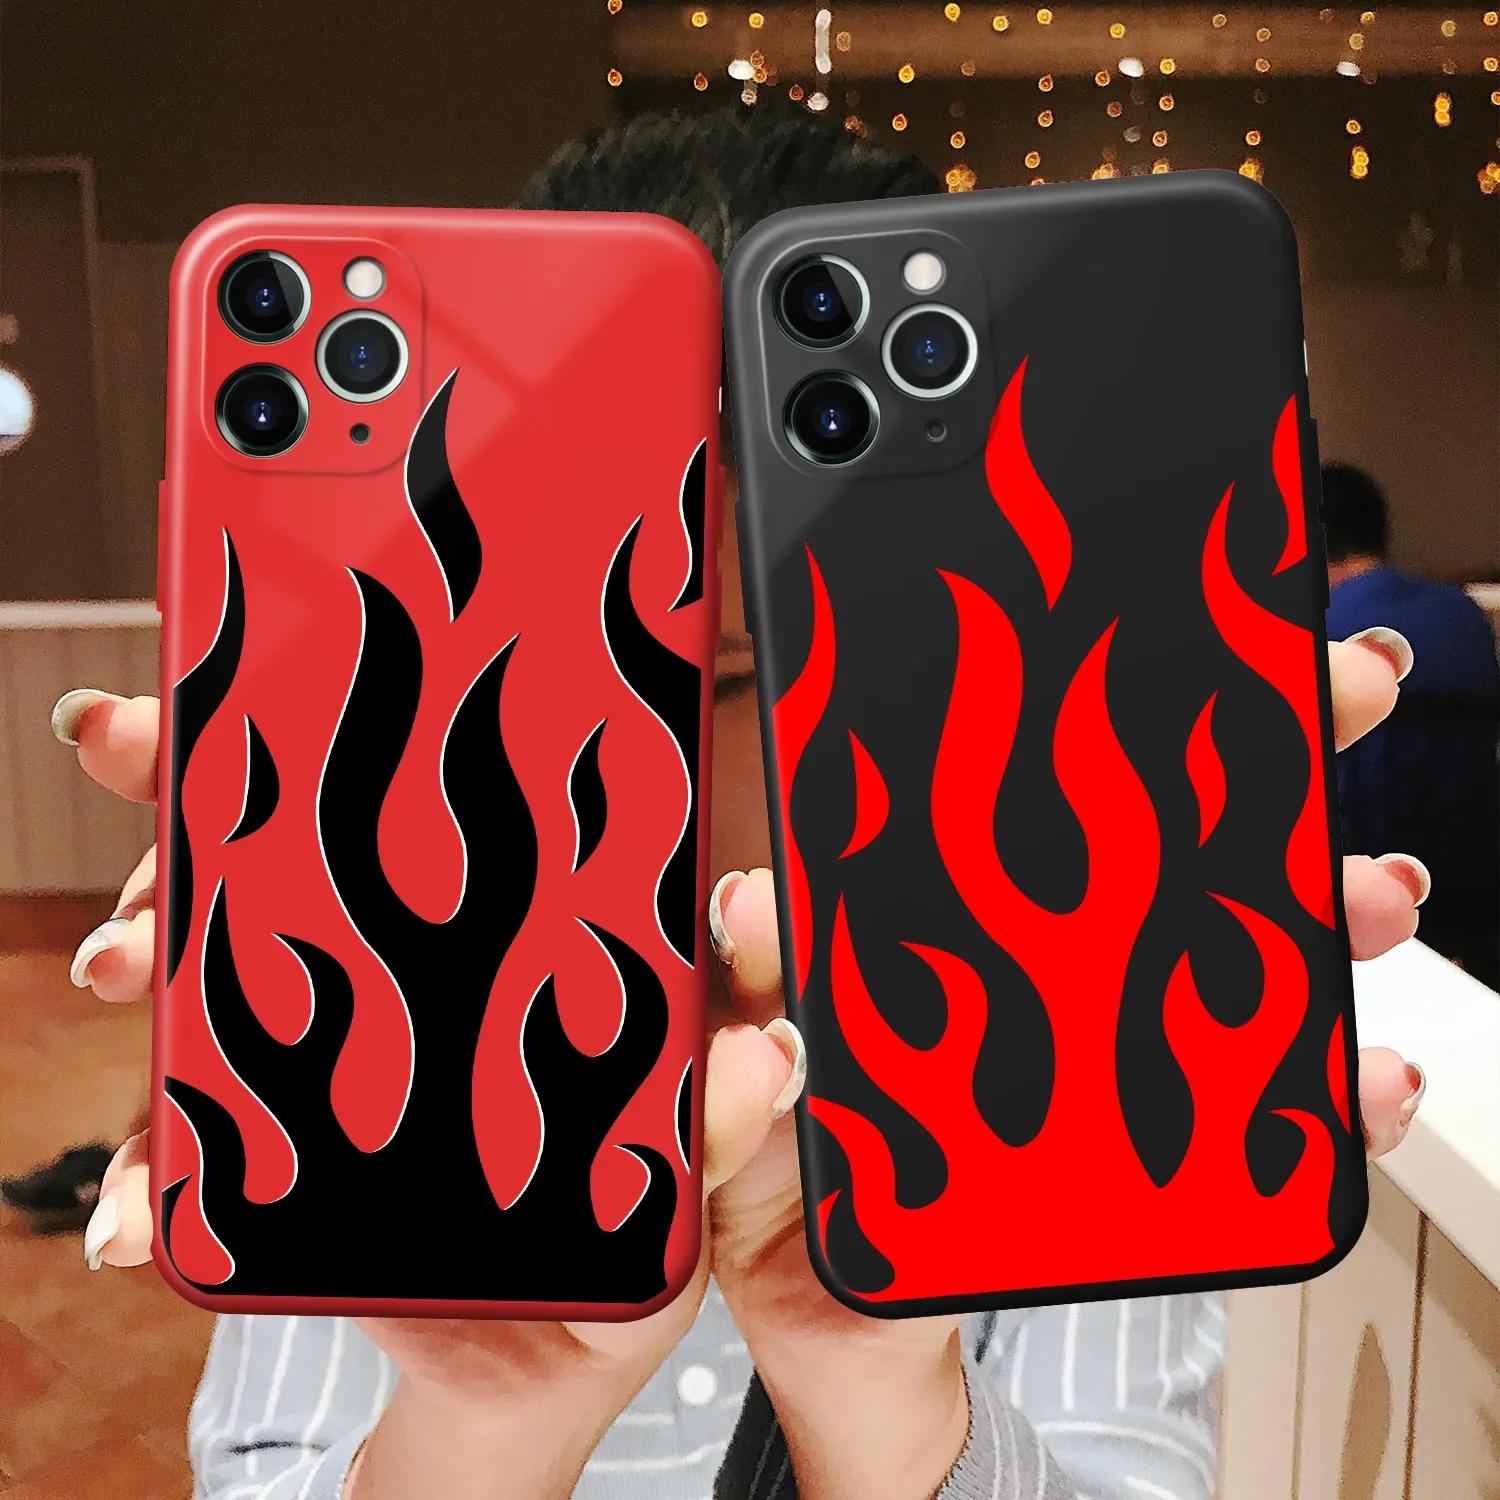 

Fashion Flame Pattern Phone Case For iPhone X XS MAX 11 Pro 12 XR 7 8 6Plus SE 2020 Black Red Soft Silicone Back Cover Capa